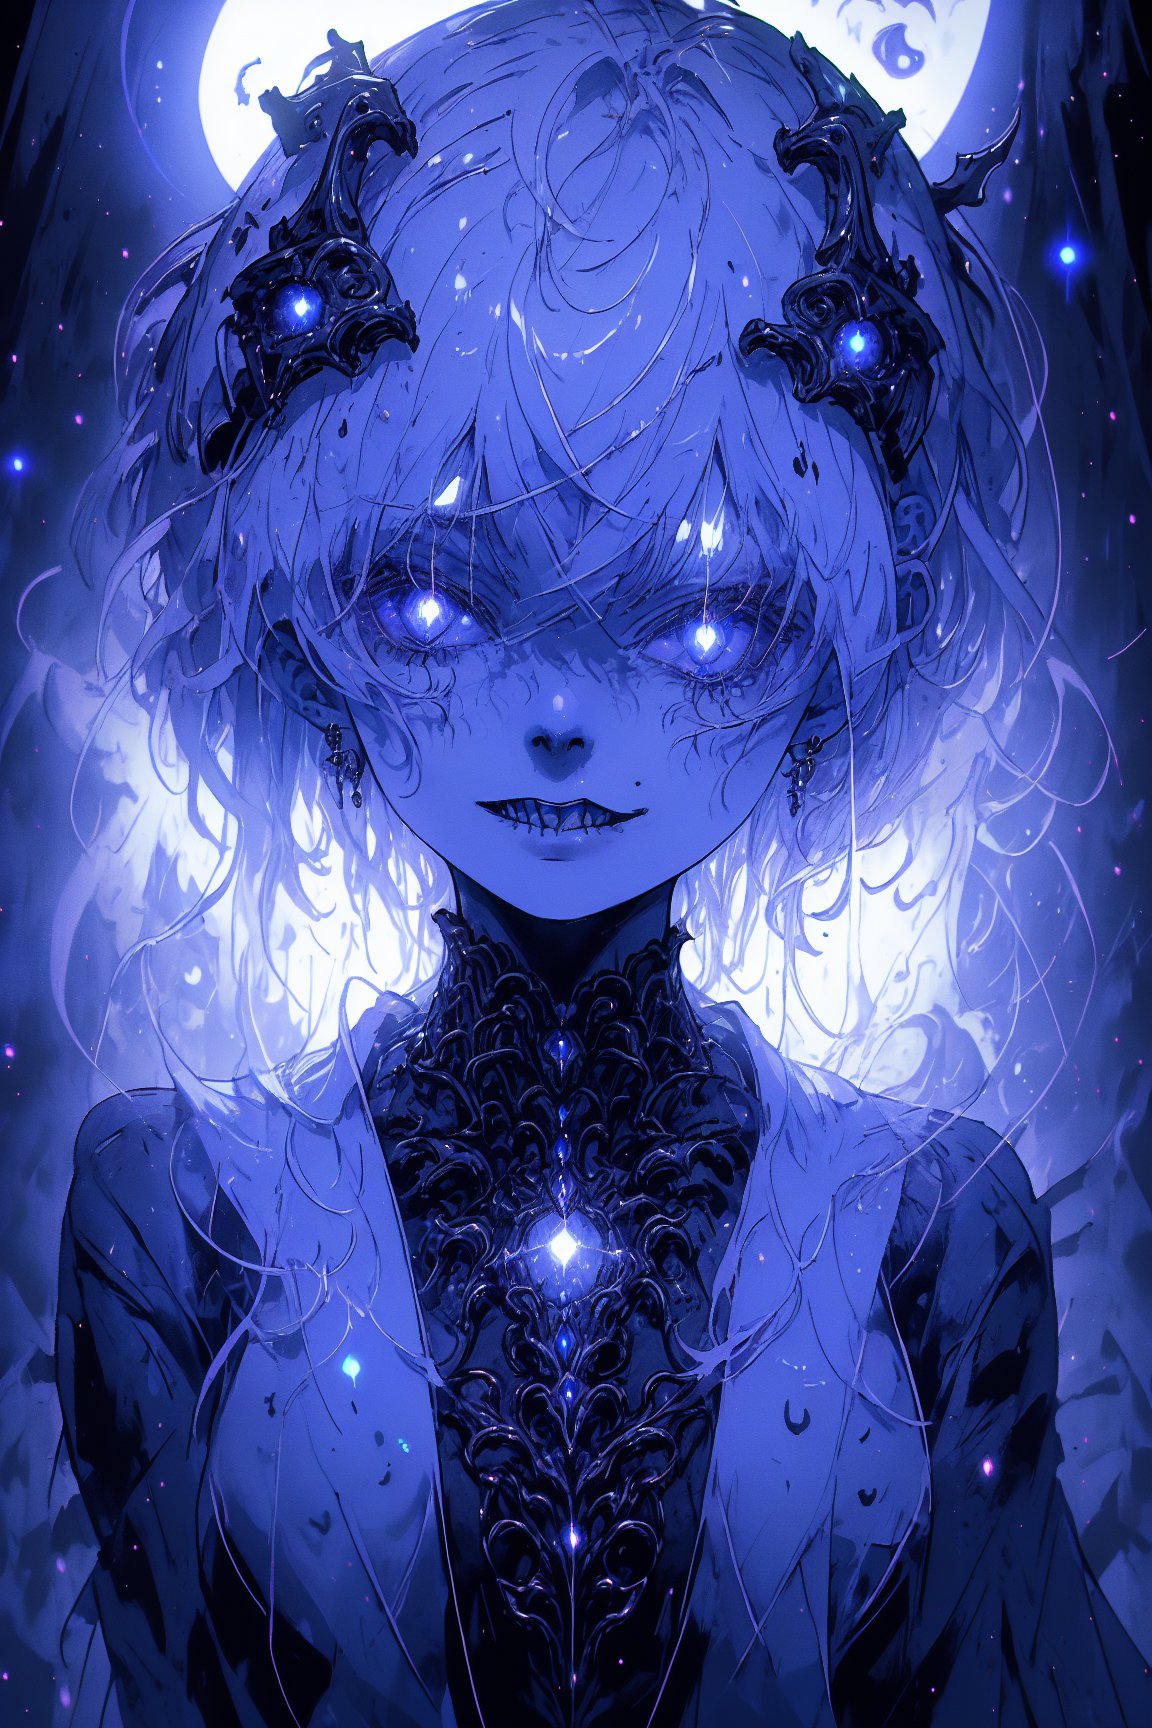 (masterpiece, best quality, highres:1.3), ultra resolution image, (1girl), female, (solo), white hair, eyes glinting, eerie charm, blue eyes,  (spectral chic:1.4), cryptic, labyrinthine cemetery, gothic arches, elegance, highly detailed surreal portrait, long hair, biomechanical jaw, sharp metallic teeth, dripping liquid, glowing eyes, cyberpunk, horror , striking, pastel, soft (necropolis:1.5),glitter, ohterworldly energy, green wisps, moonlit paradise,  (mystic tranquility:1.3), realm of the decease, chaosmix